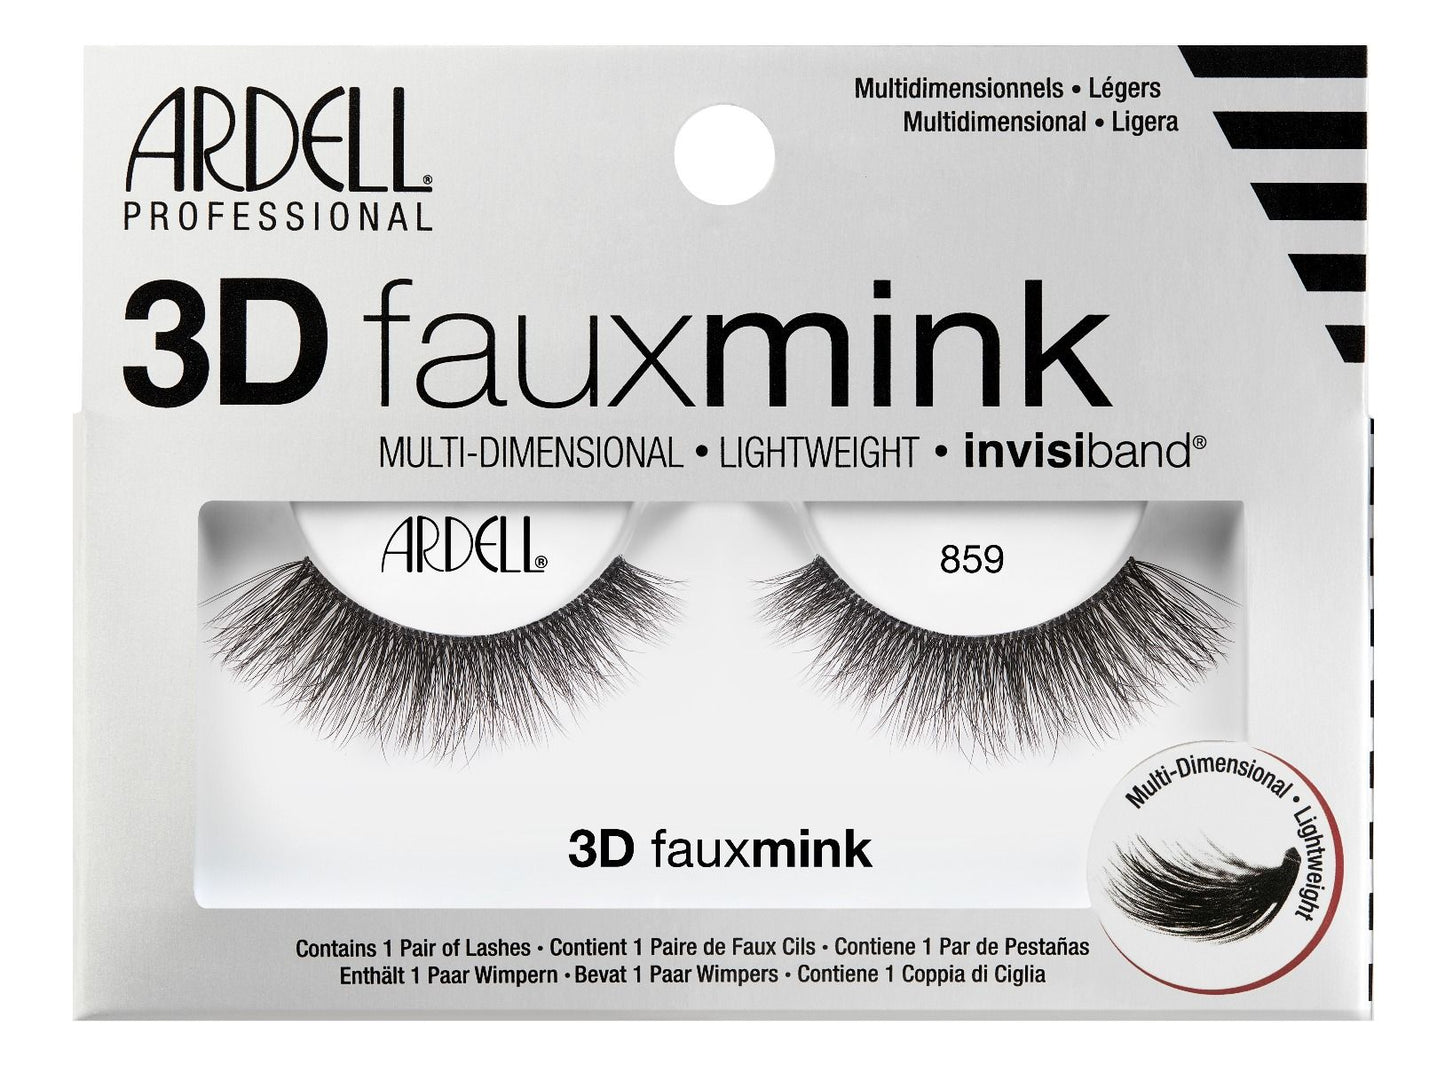 A single pair of 3D Faux mink 859 by Ardell in its retail packaging with some features written on it